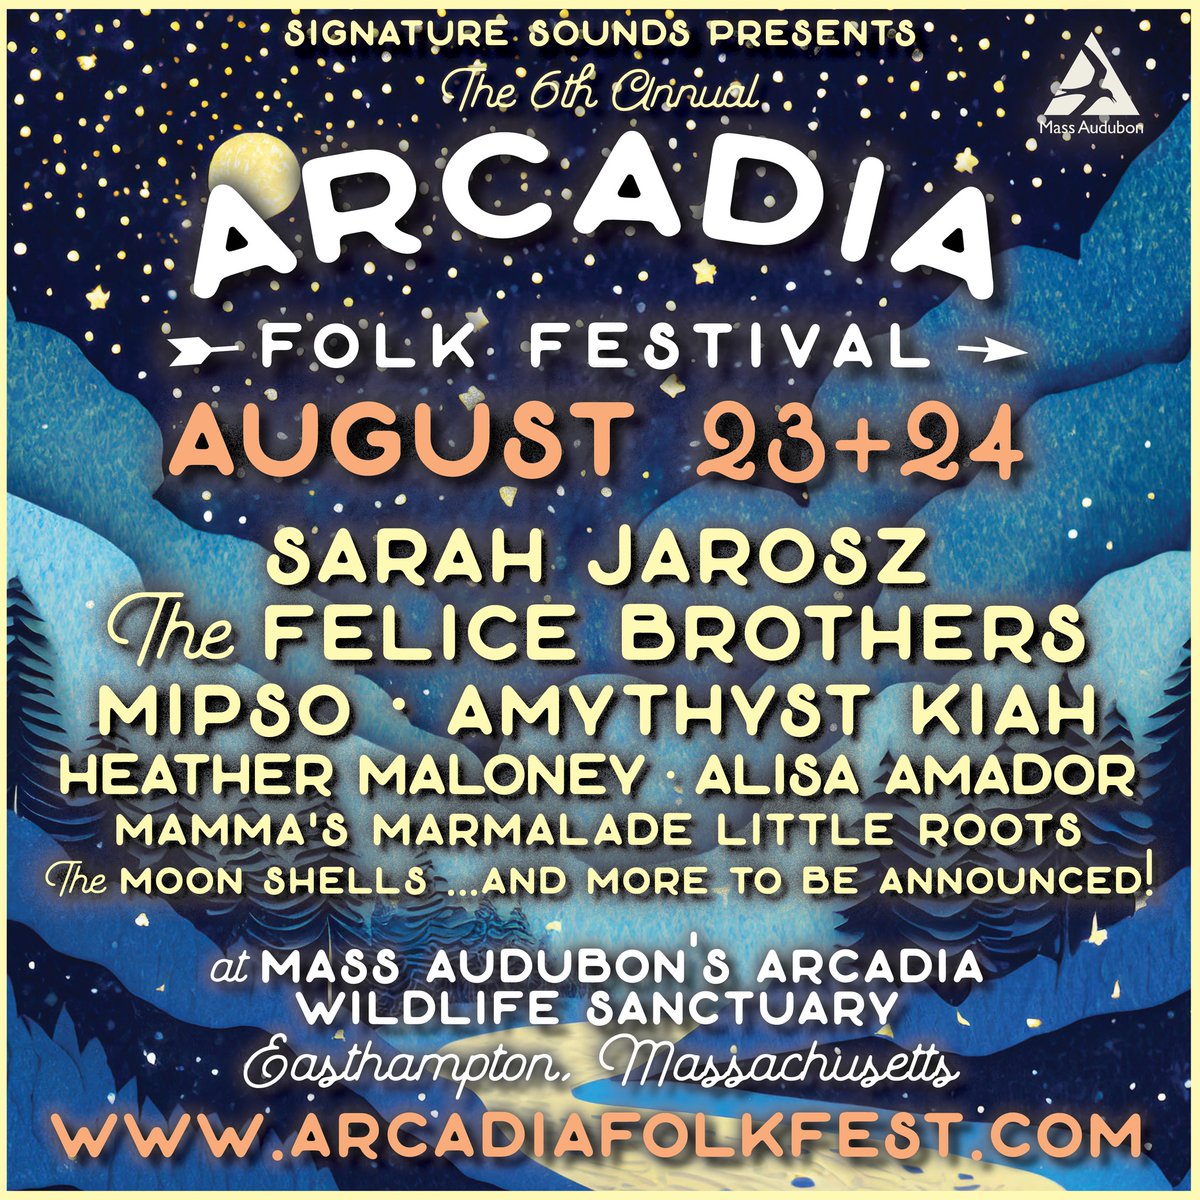 Early Bird Tickets are ending soon! Grab yours now: arcadiafolkfest.com